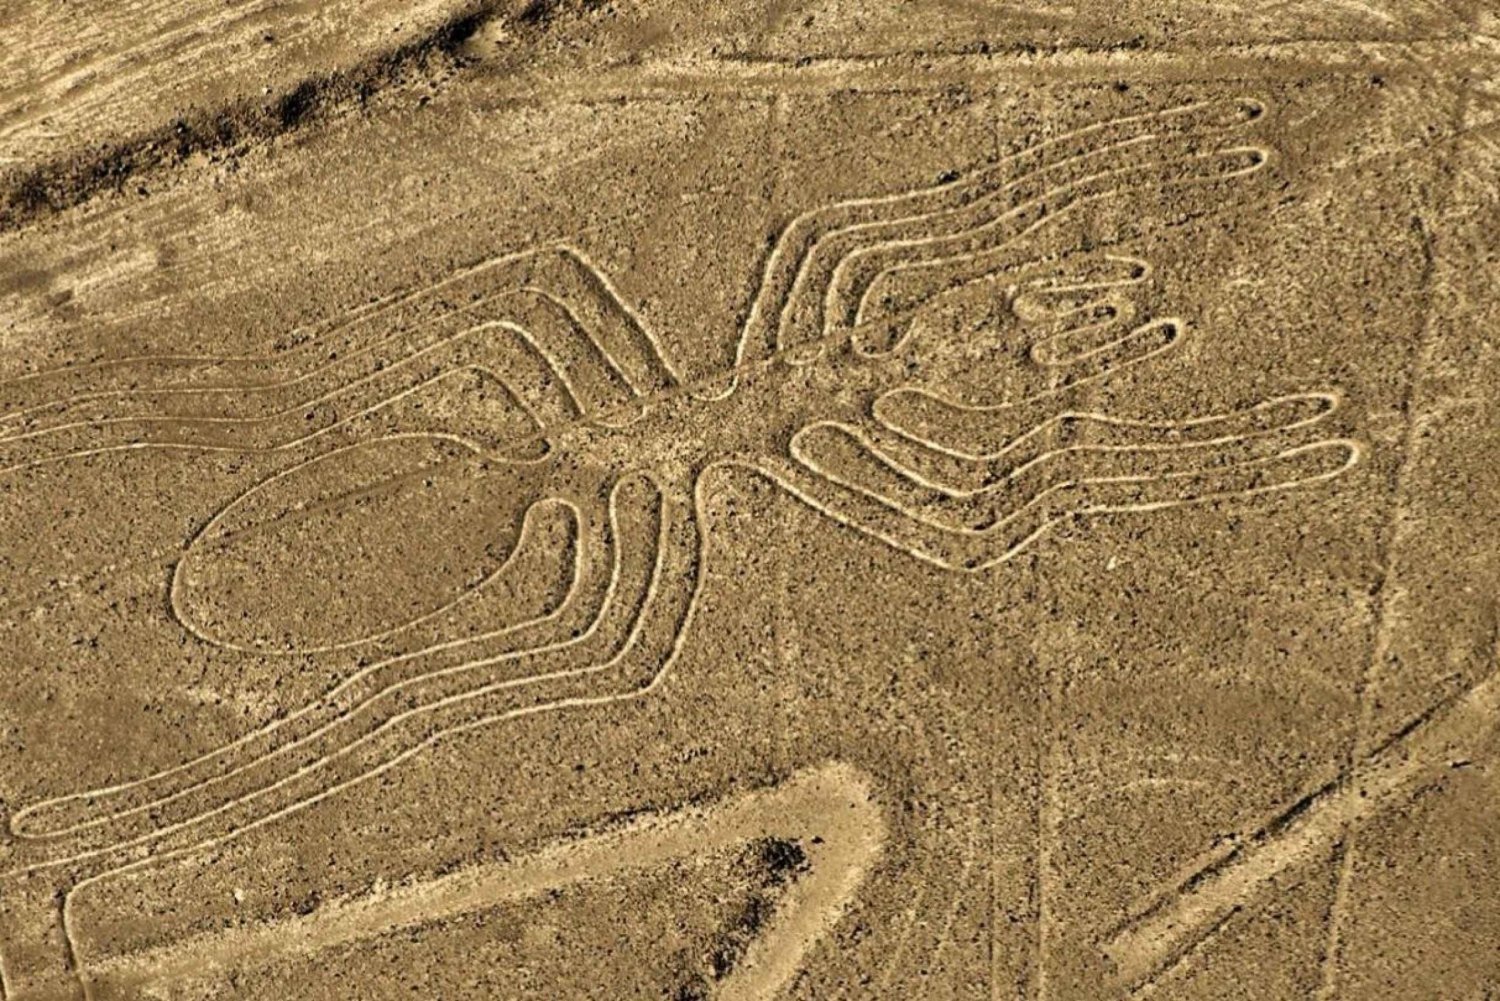 From Nazca: Small plane flight over the Nazca Lines